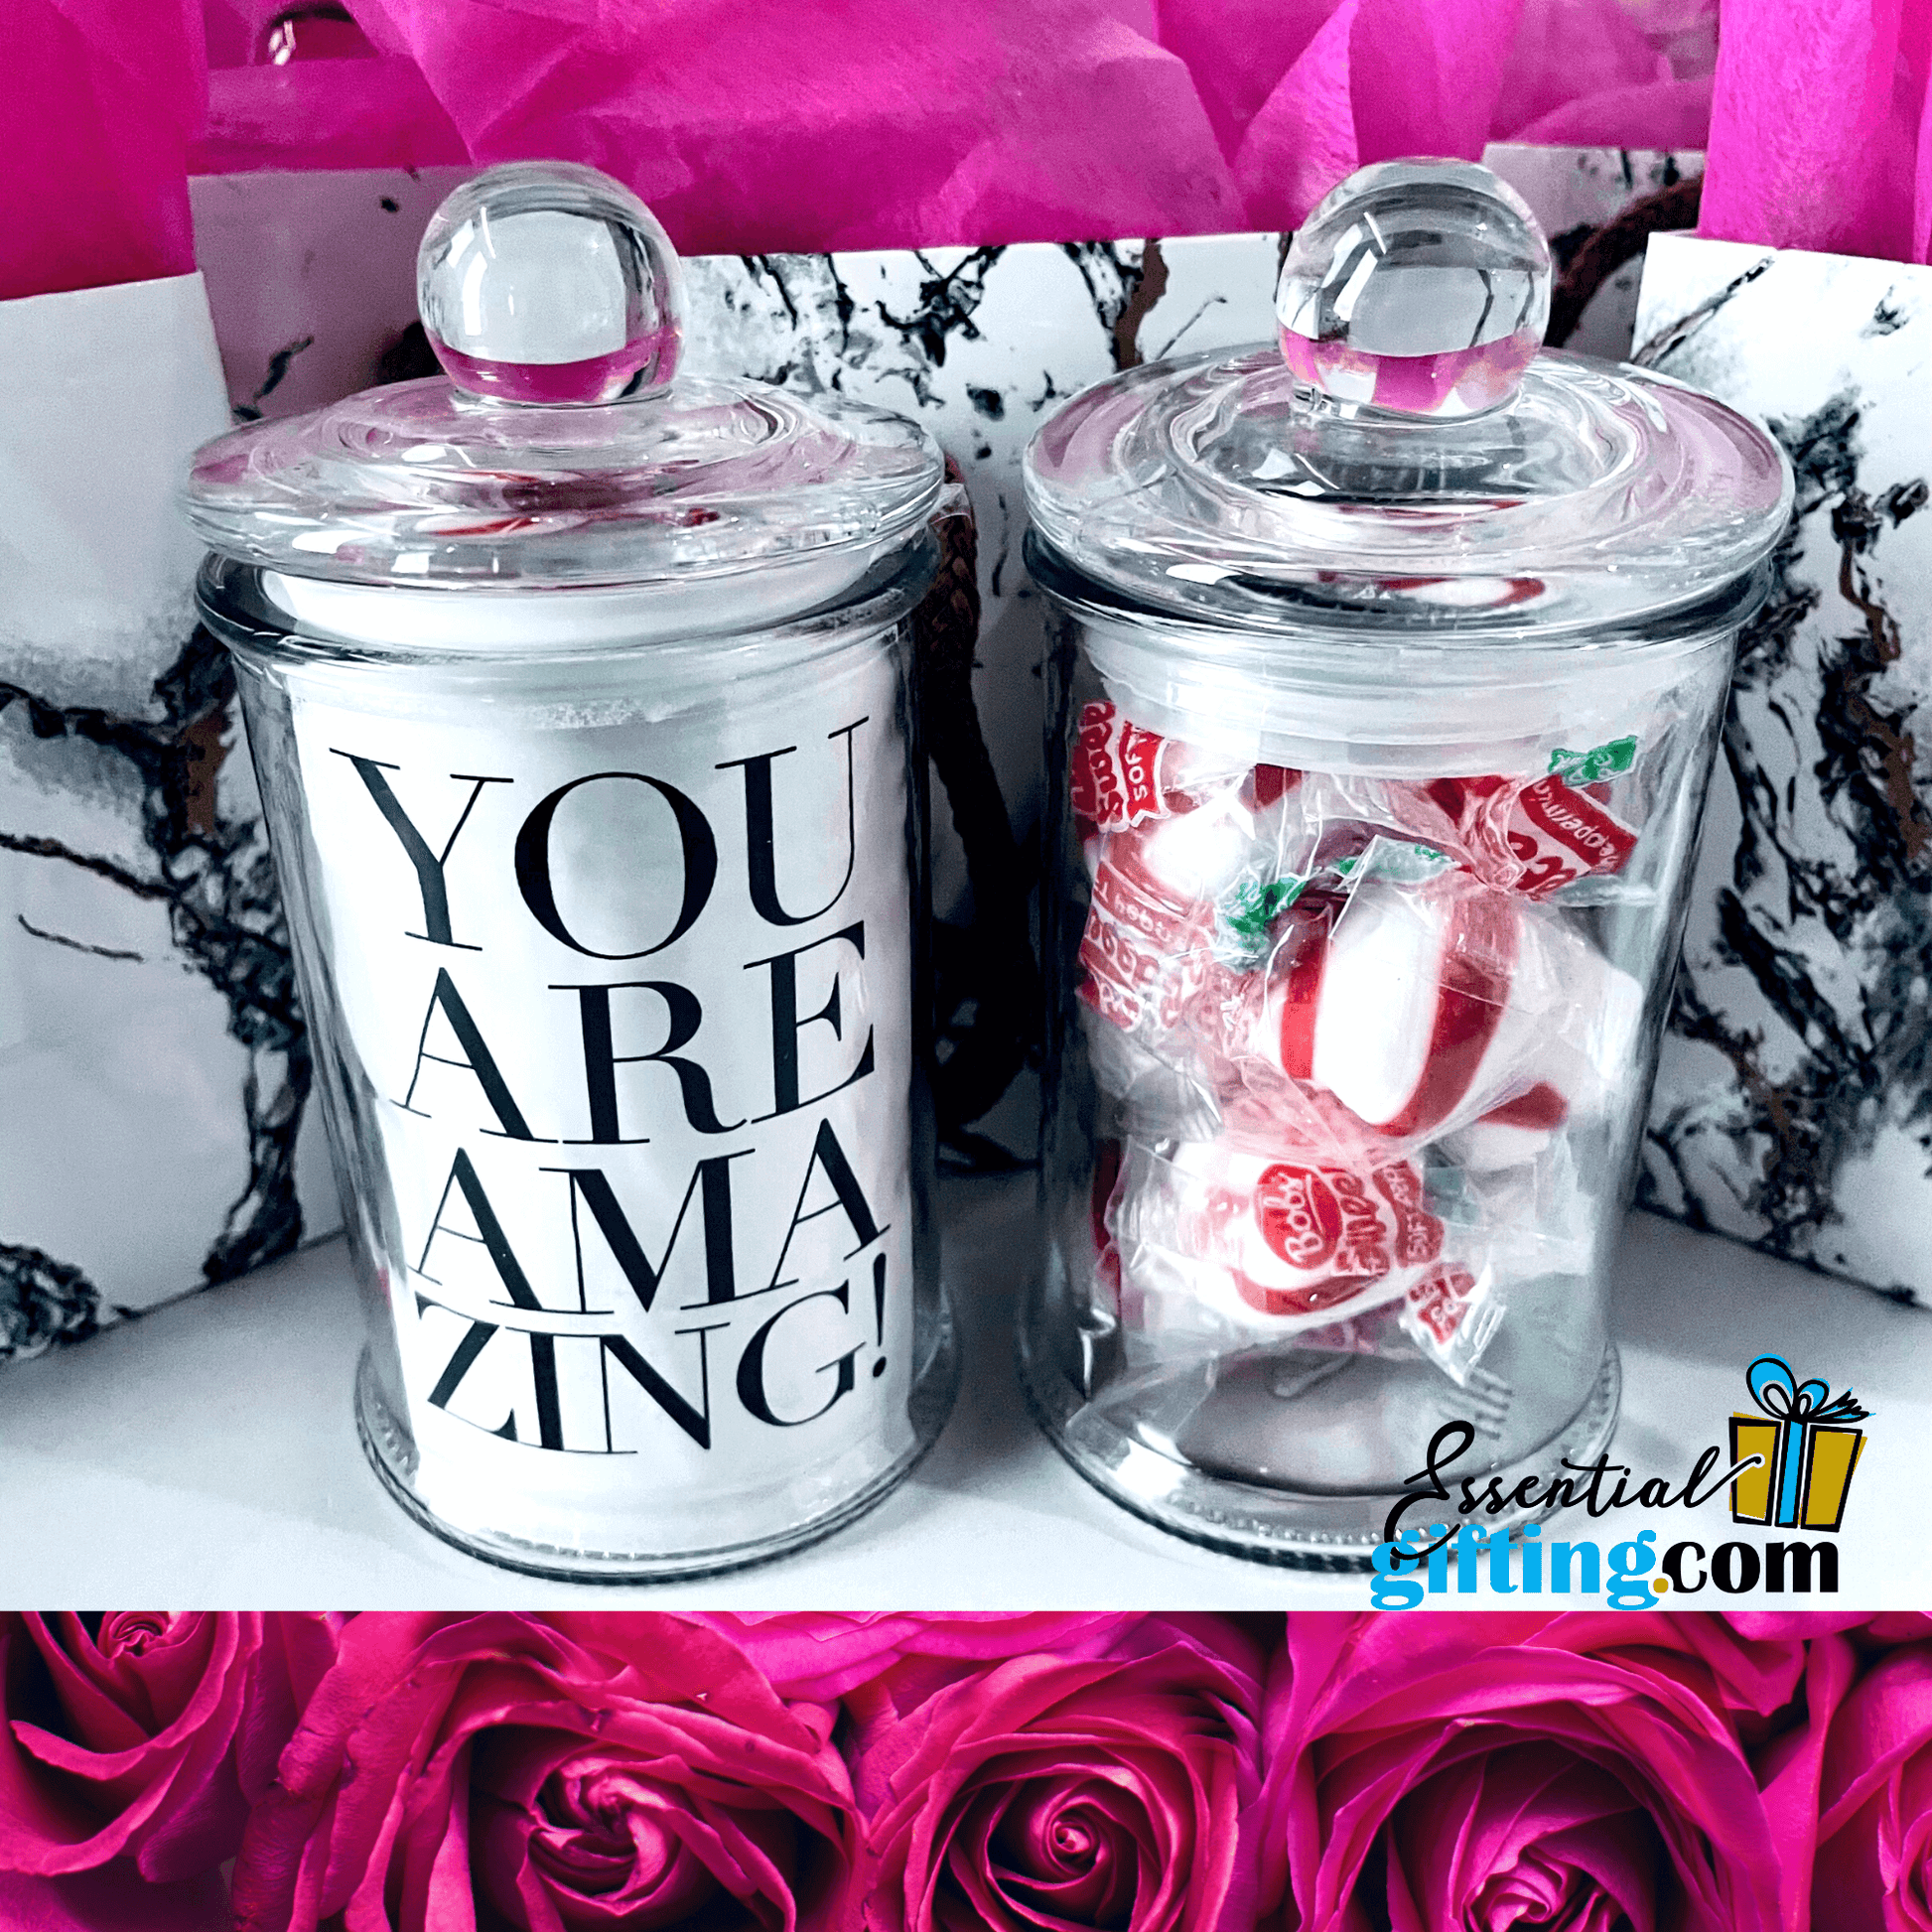 Decorative candy jars with "You are amazing" text, filled with red and white peppermint candies, set against a backdrop of vibrant pink roses.